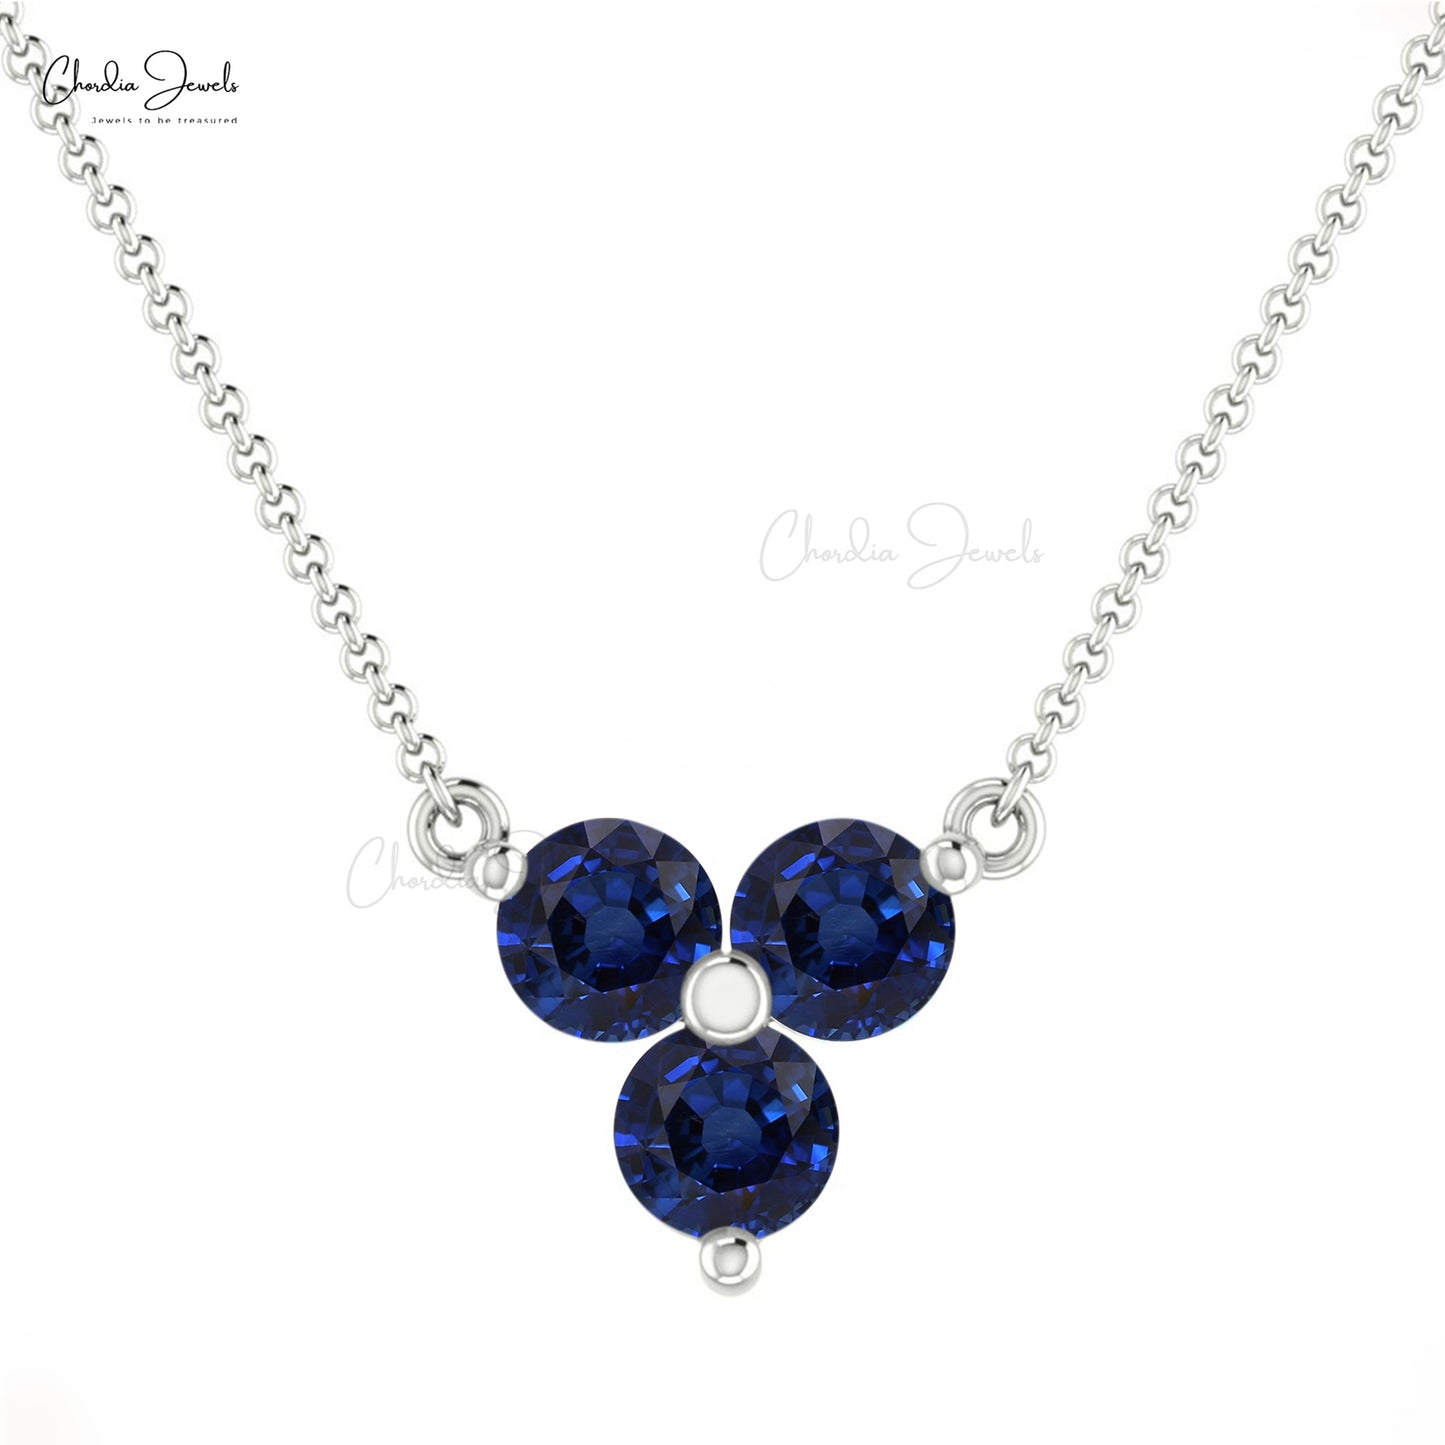 Buy Sapphire Necklace